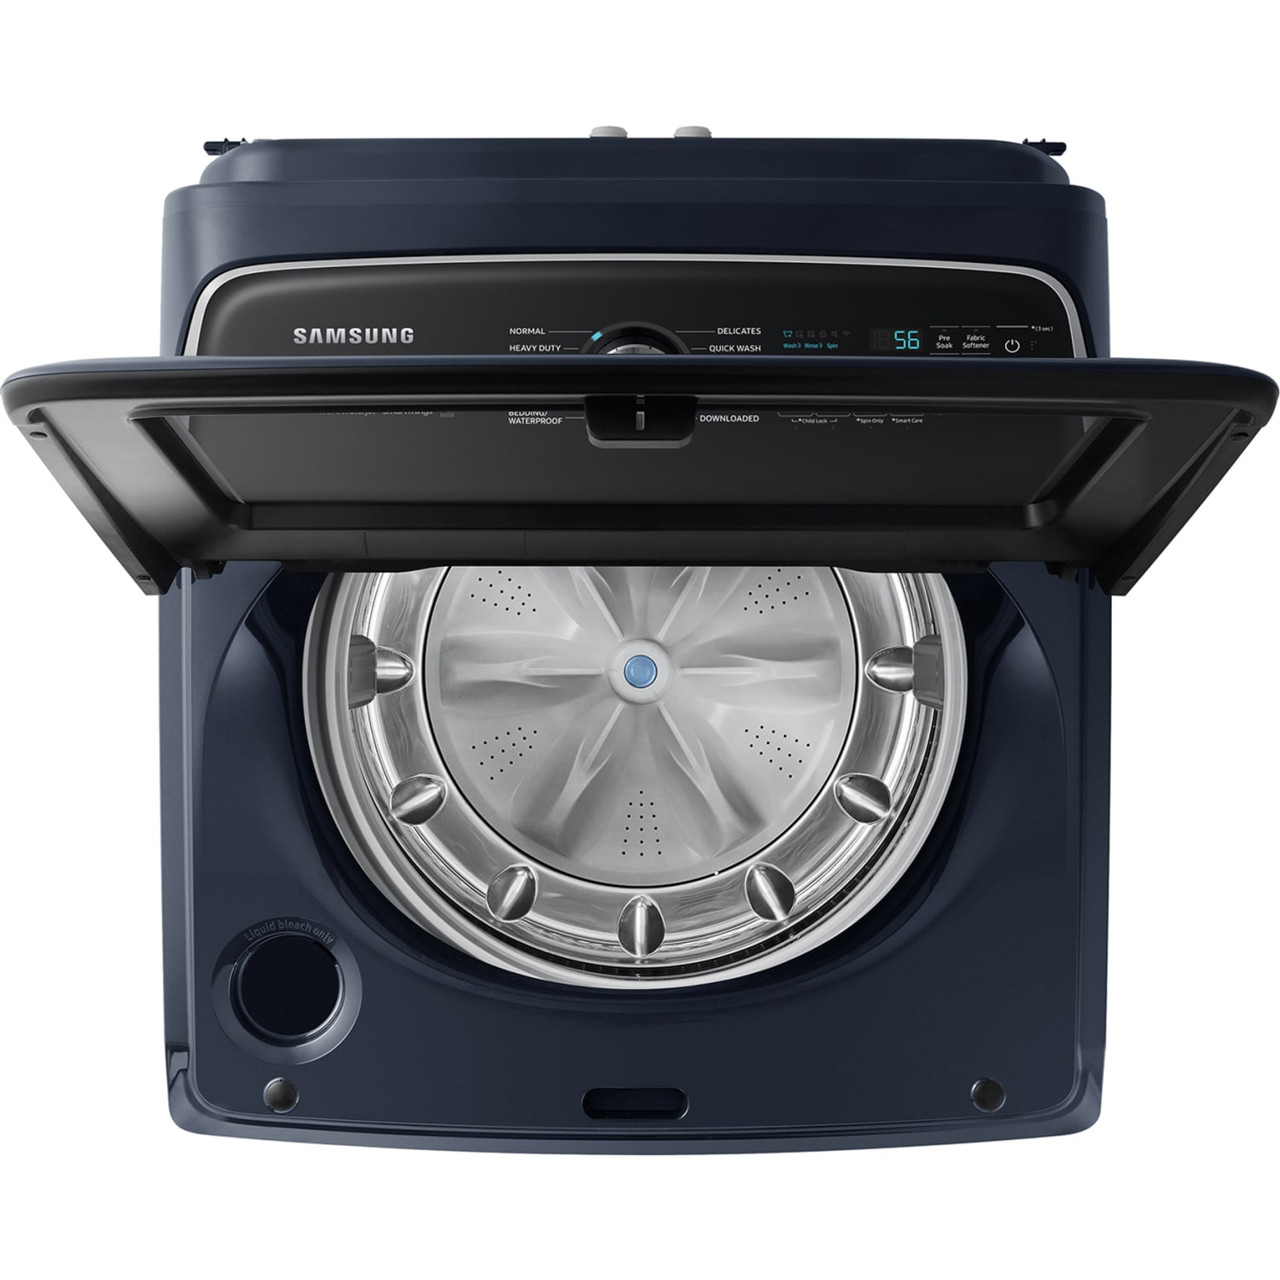 Samsung 5.4 cu. ft. Smart Top Load Washer with Pet Care Solution and Super Speed Wash - WA54CG7150AD